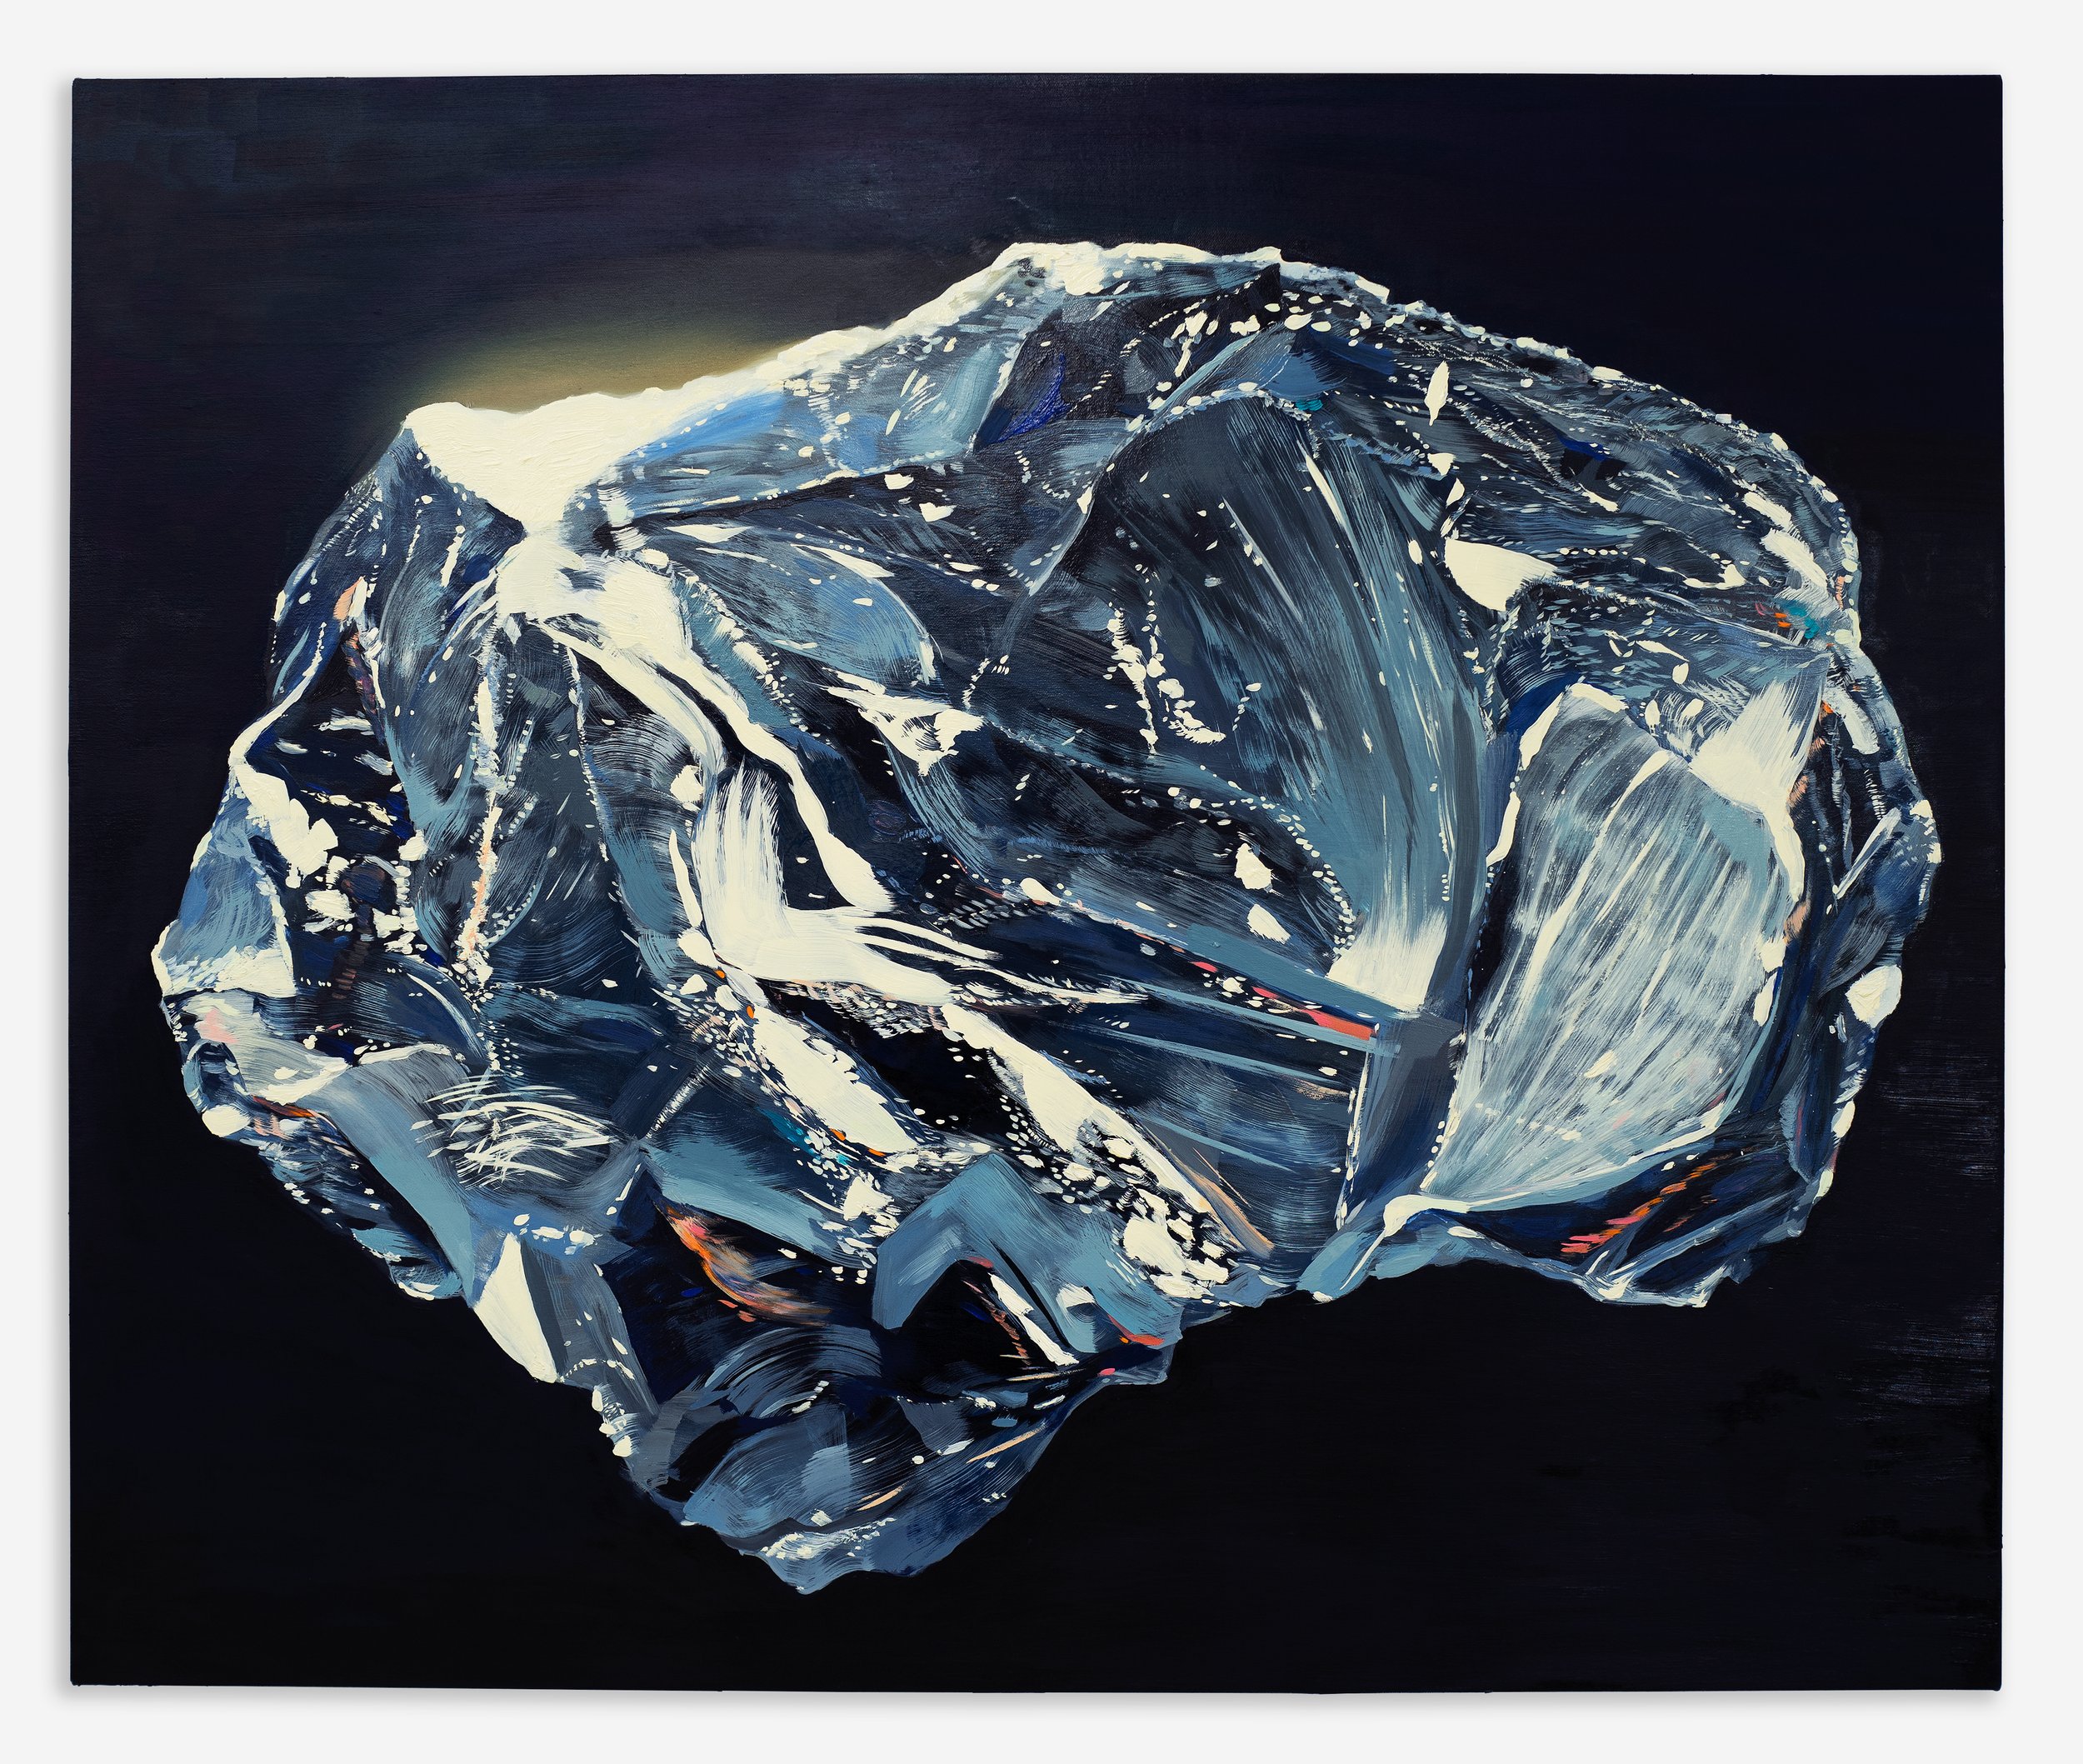   Silicon , 2023  Oil on linen  76 x 91 cm (30 x 36 in) 